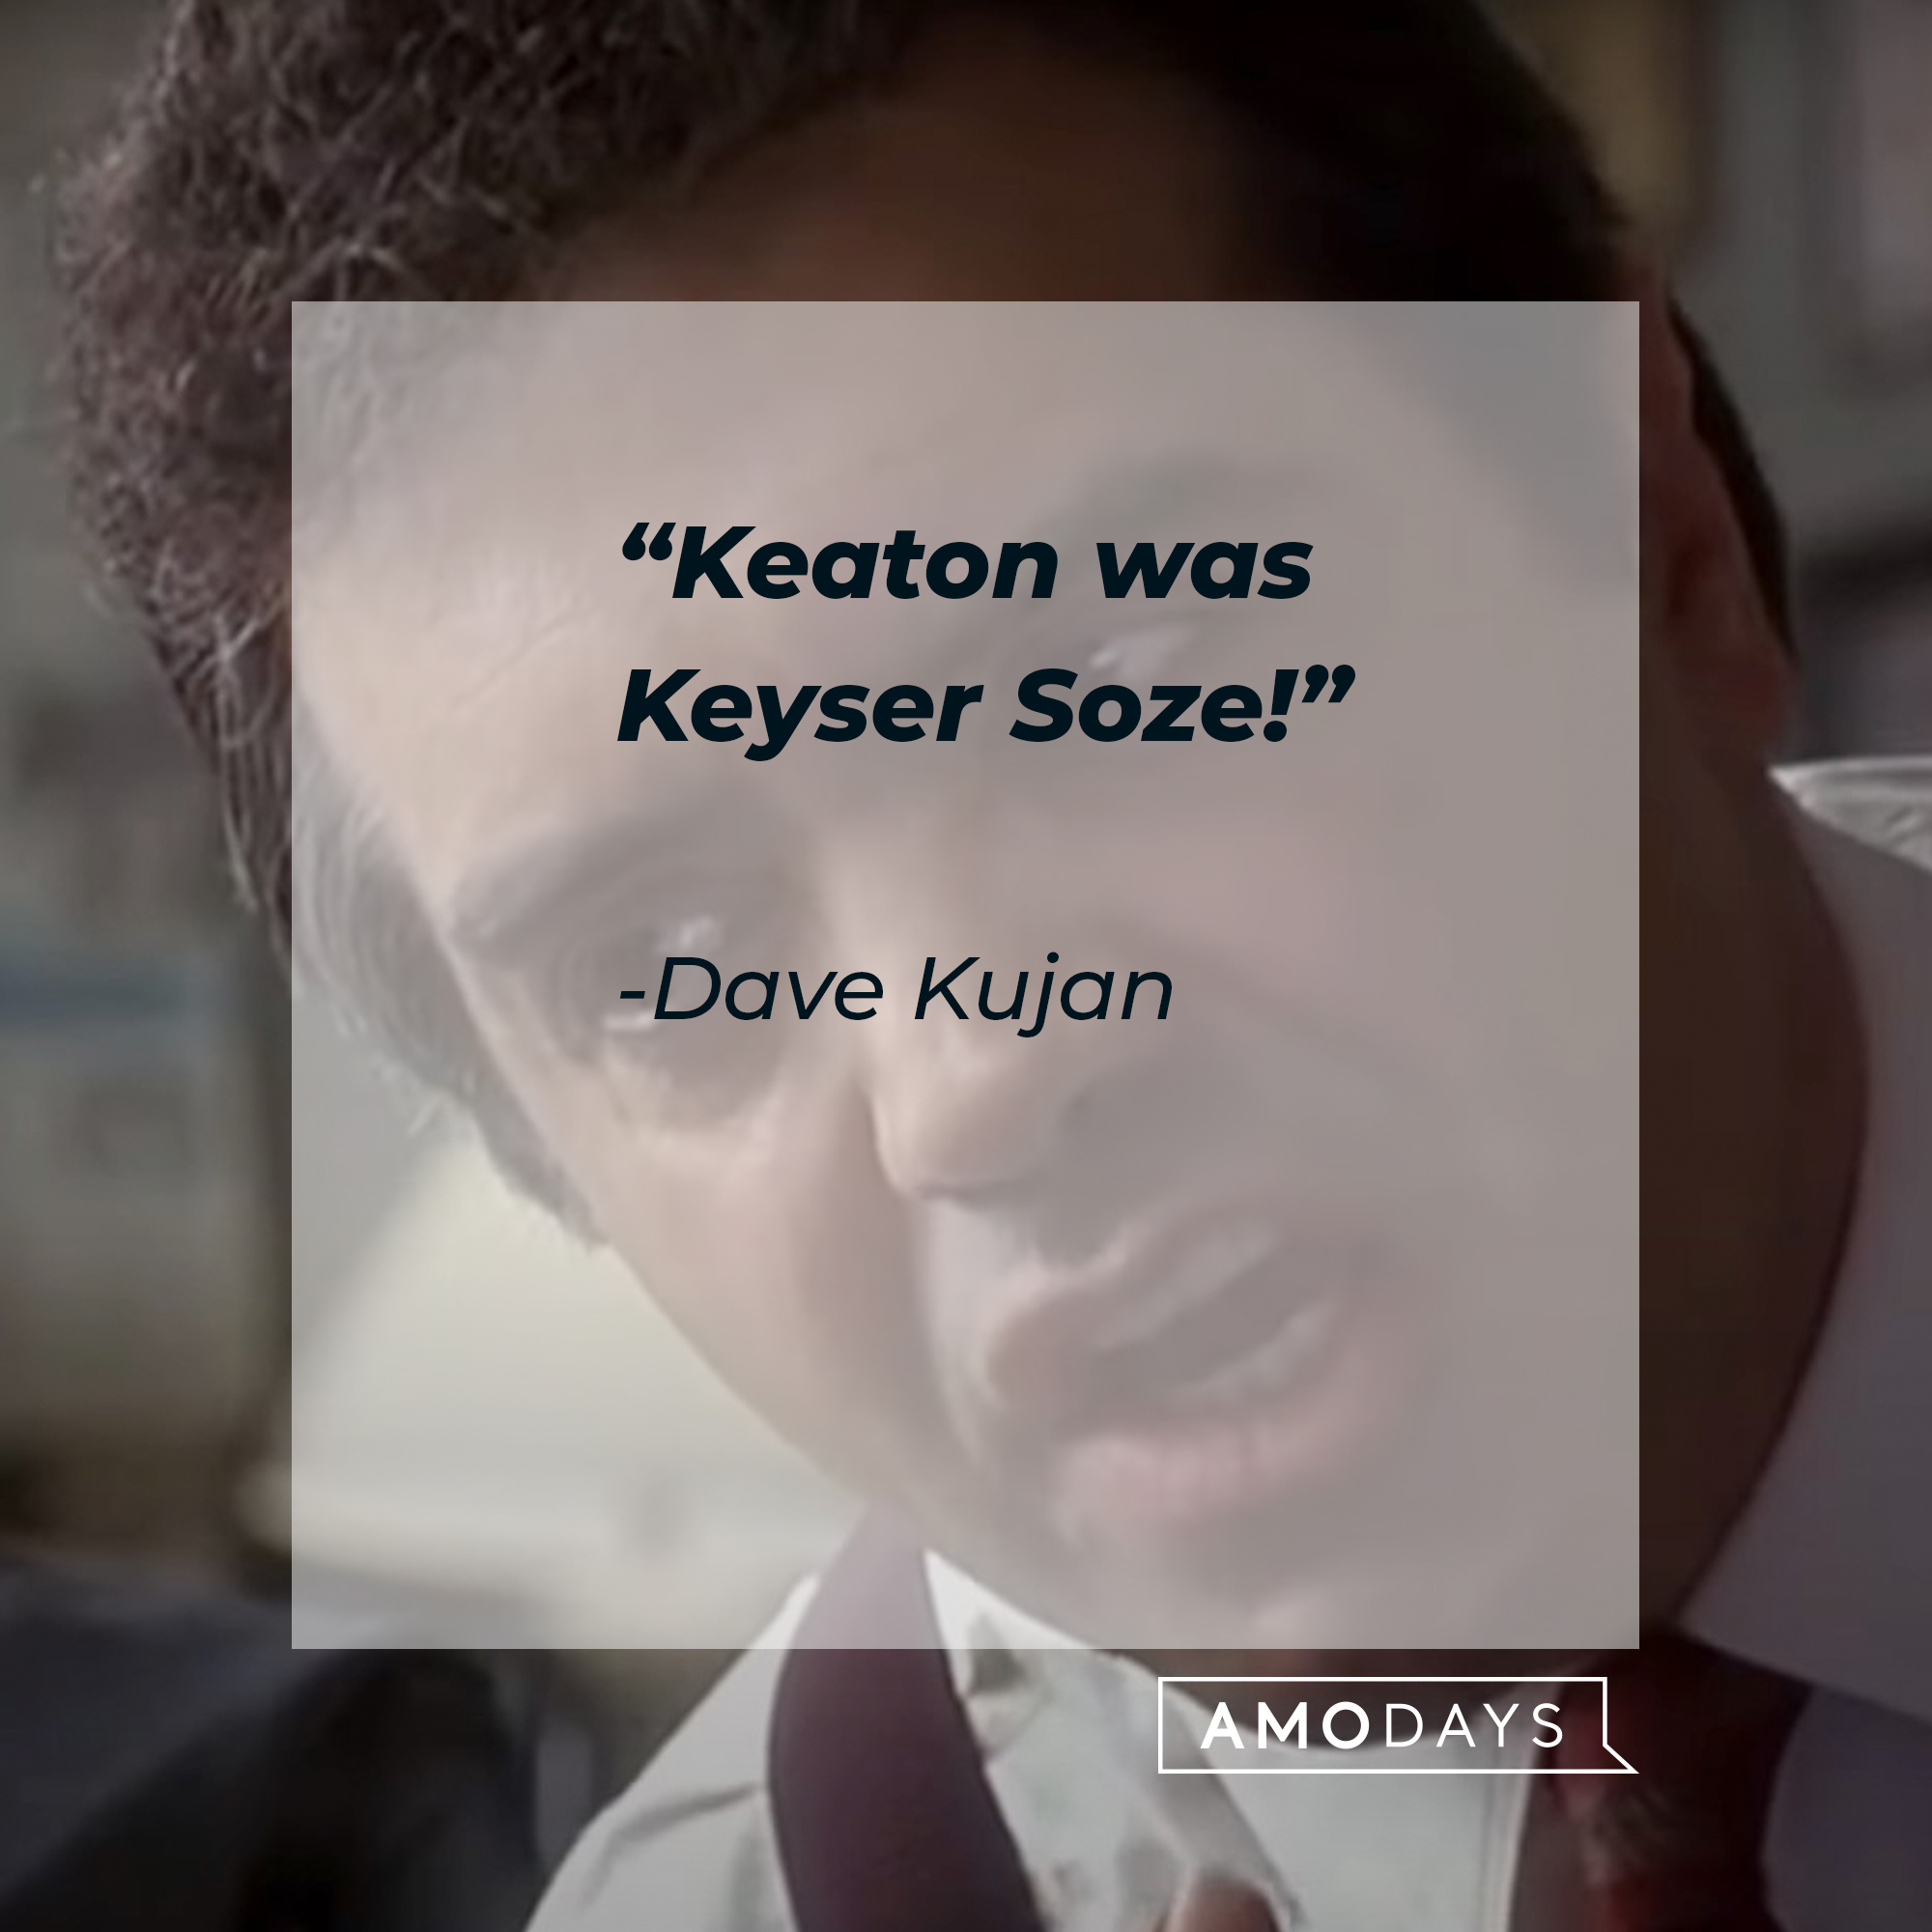 24 Kaiser Soze Quotes from 'The Usual Suspects' That Leave You Puzzled